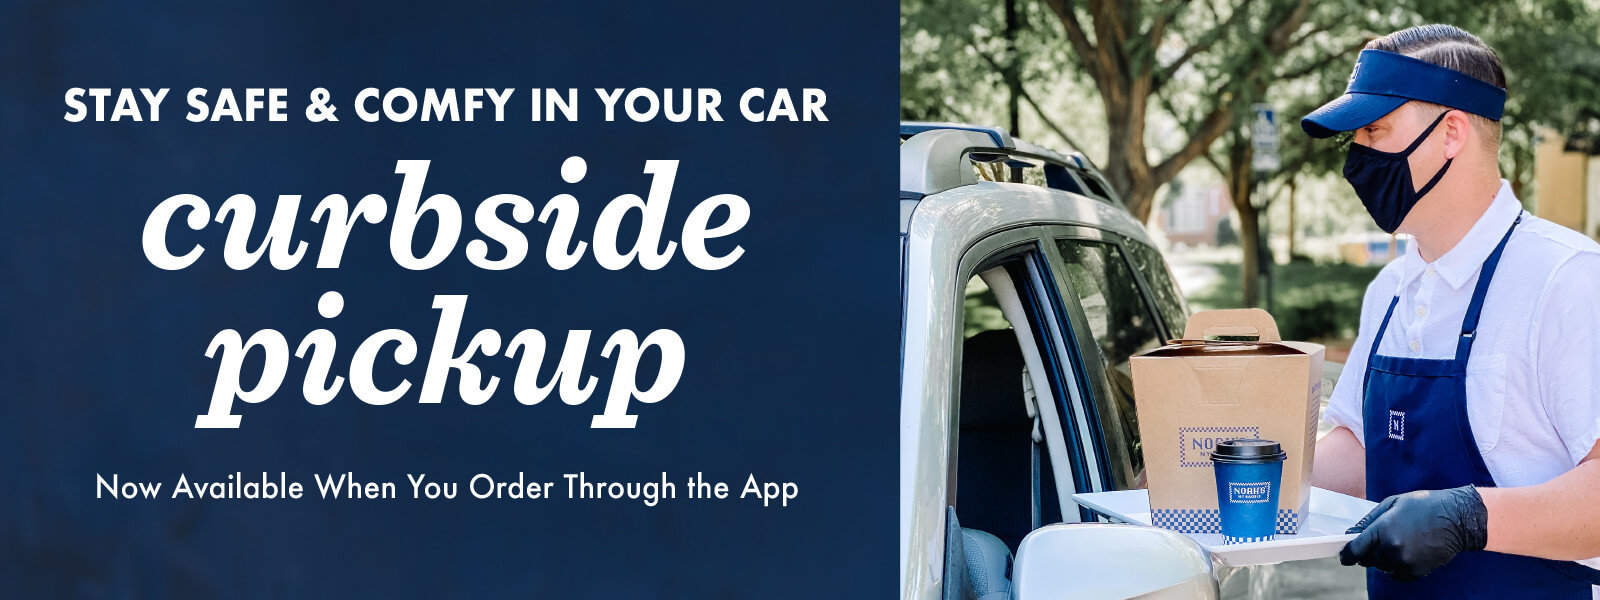 ROTATING SLIDER: Curbside Pickup available when you order through the app.